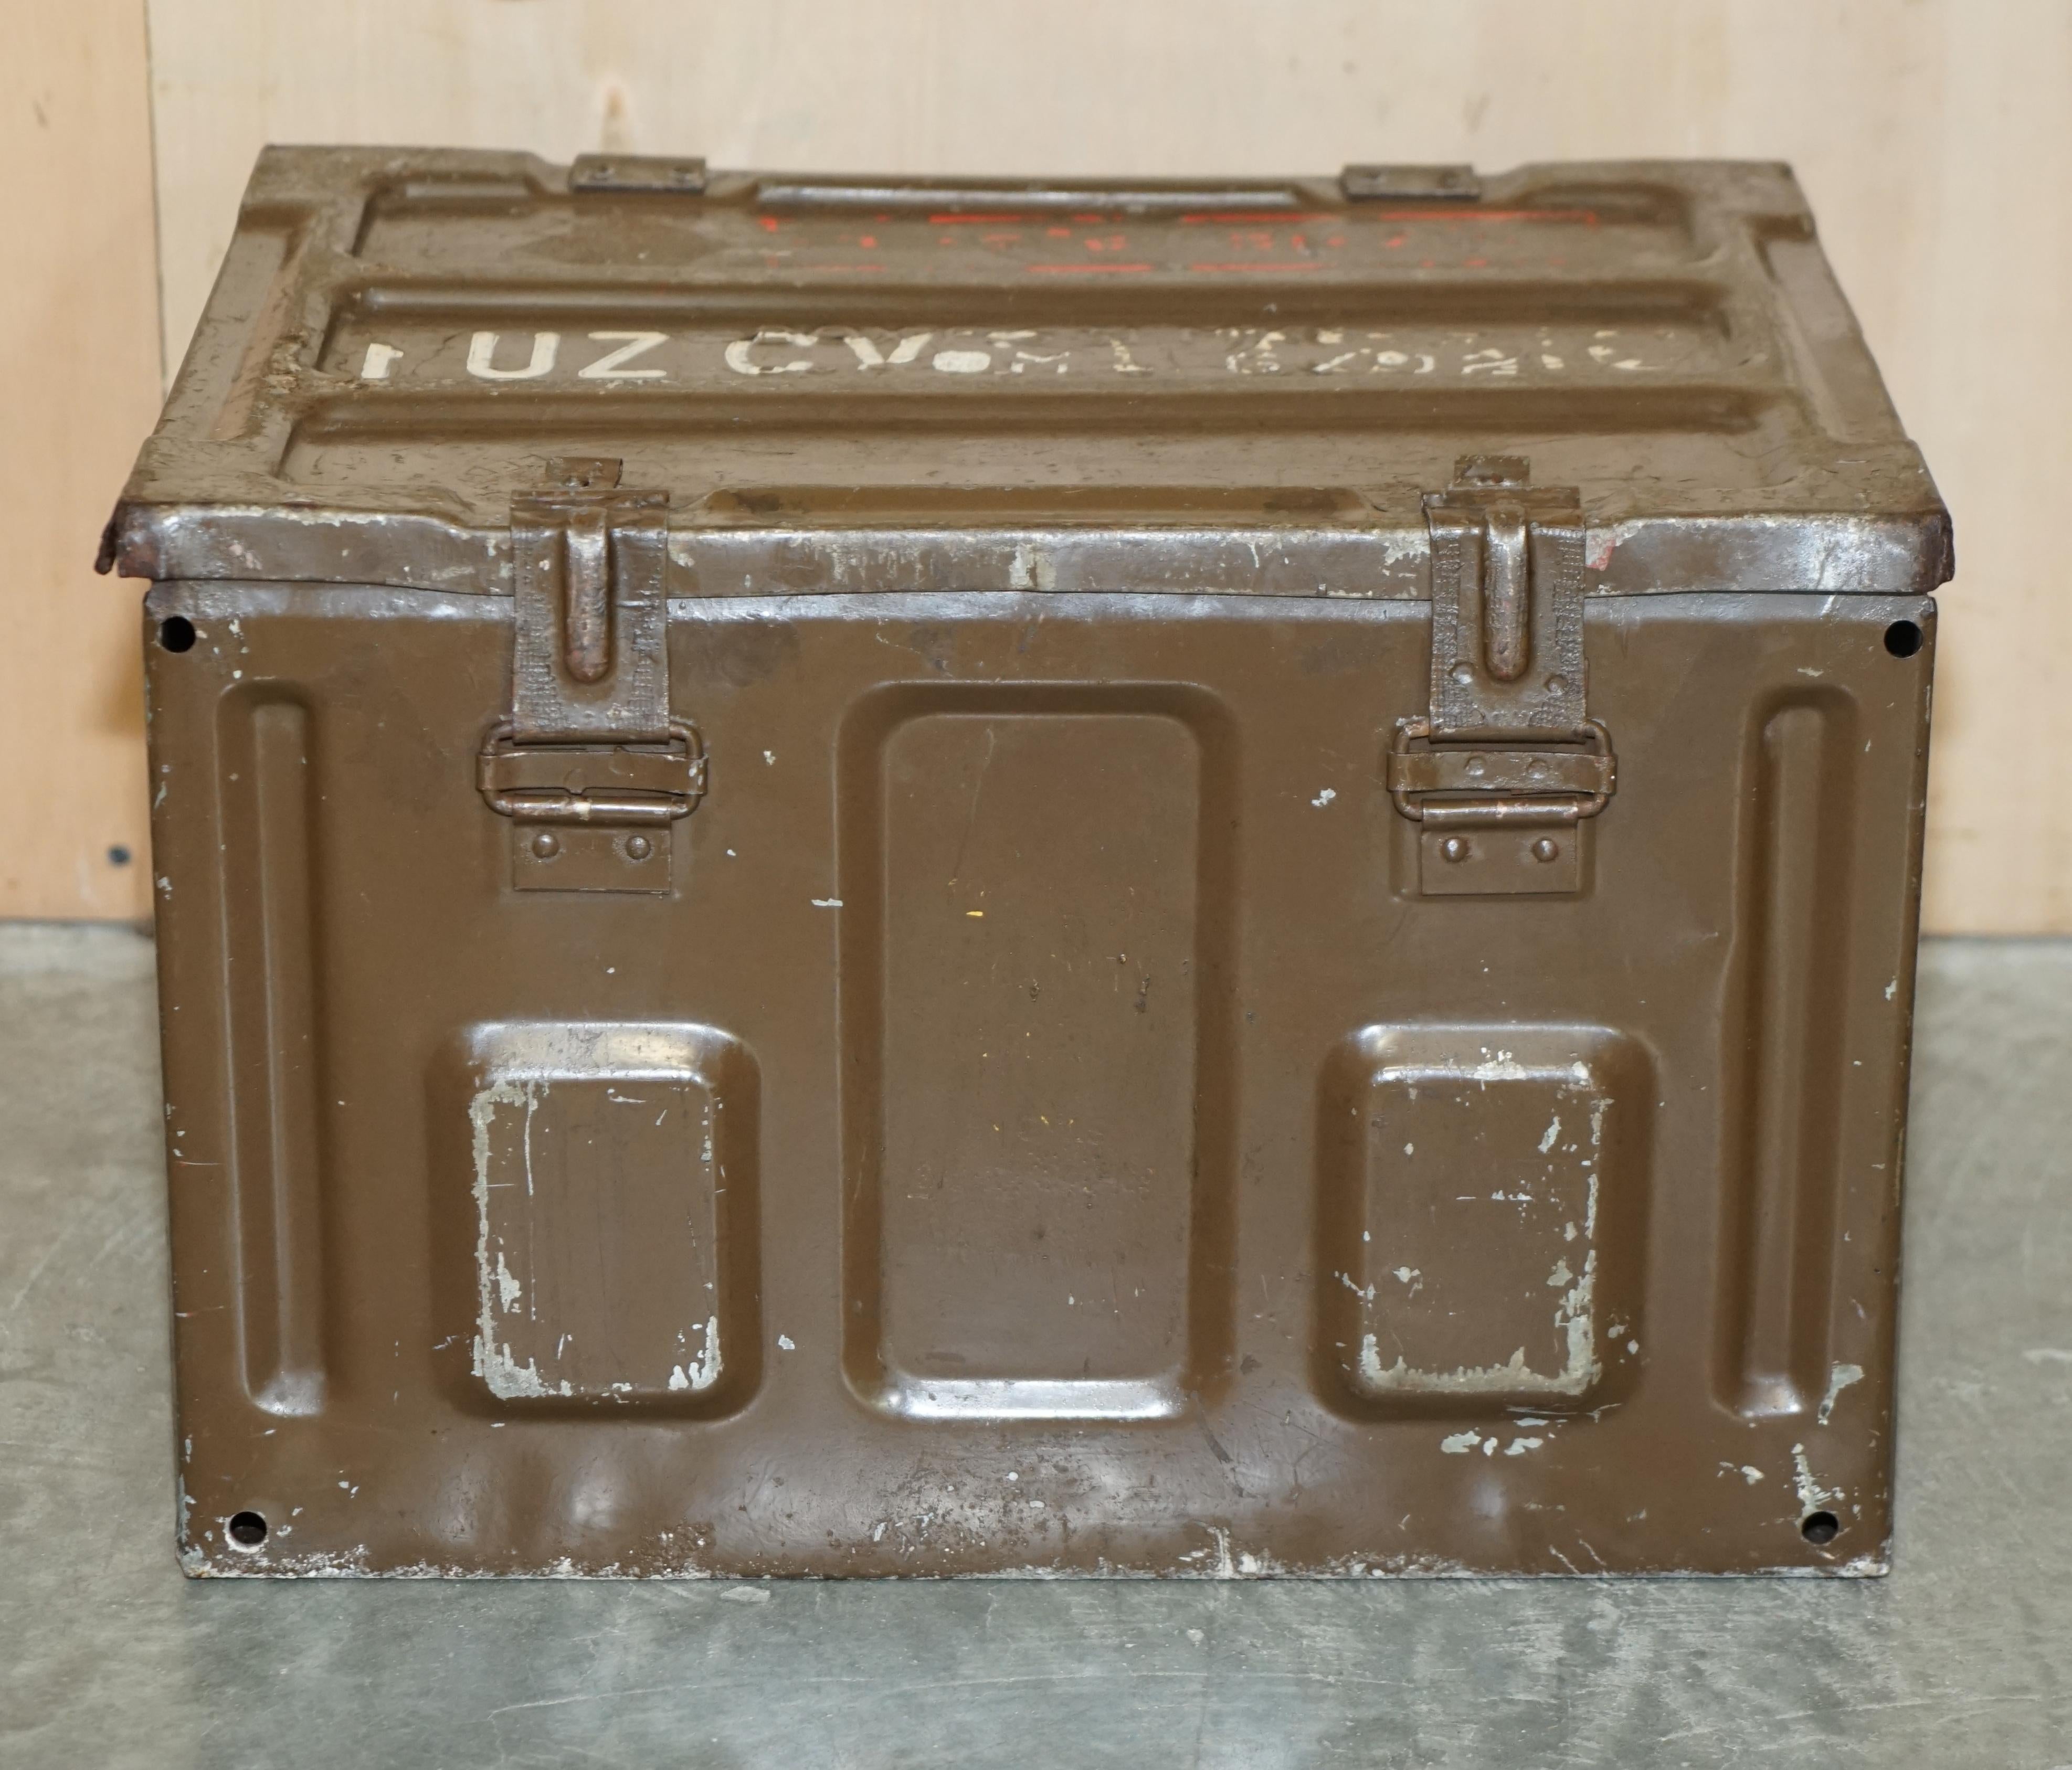 We are delighted to offer for sale this period Military Campaign used, WW2 Ammo box with all the original patina

I have two of these for sale, the second piece is listed under my other items

This is a genuine campaign used piece not Army